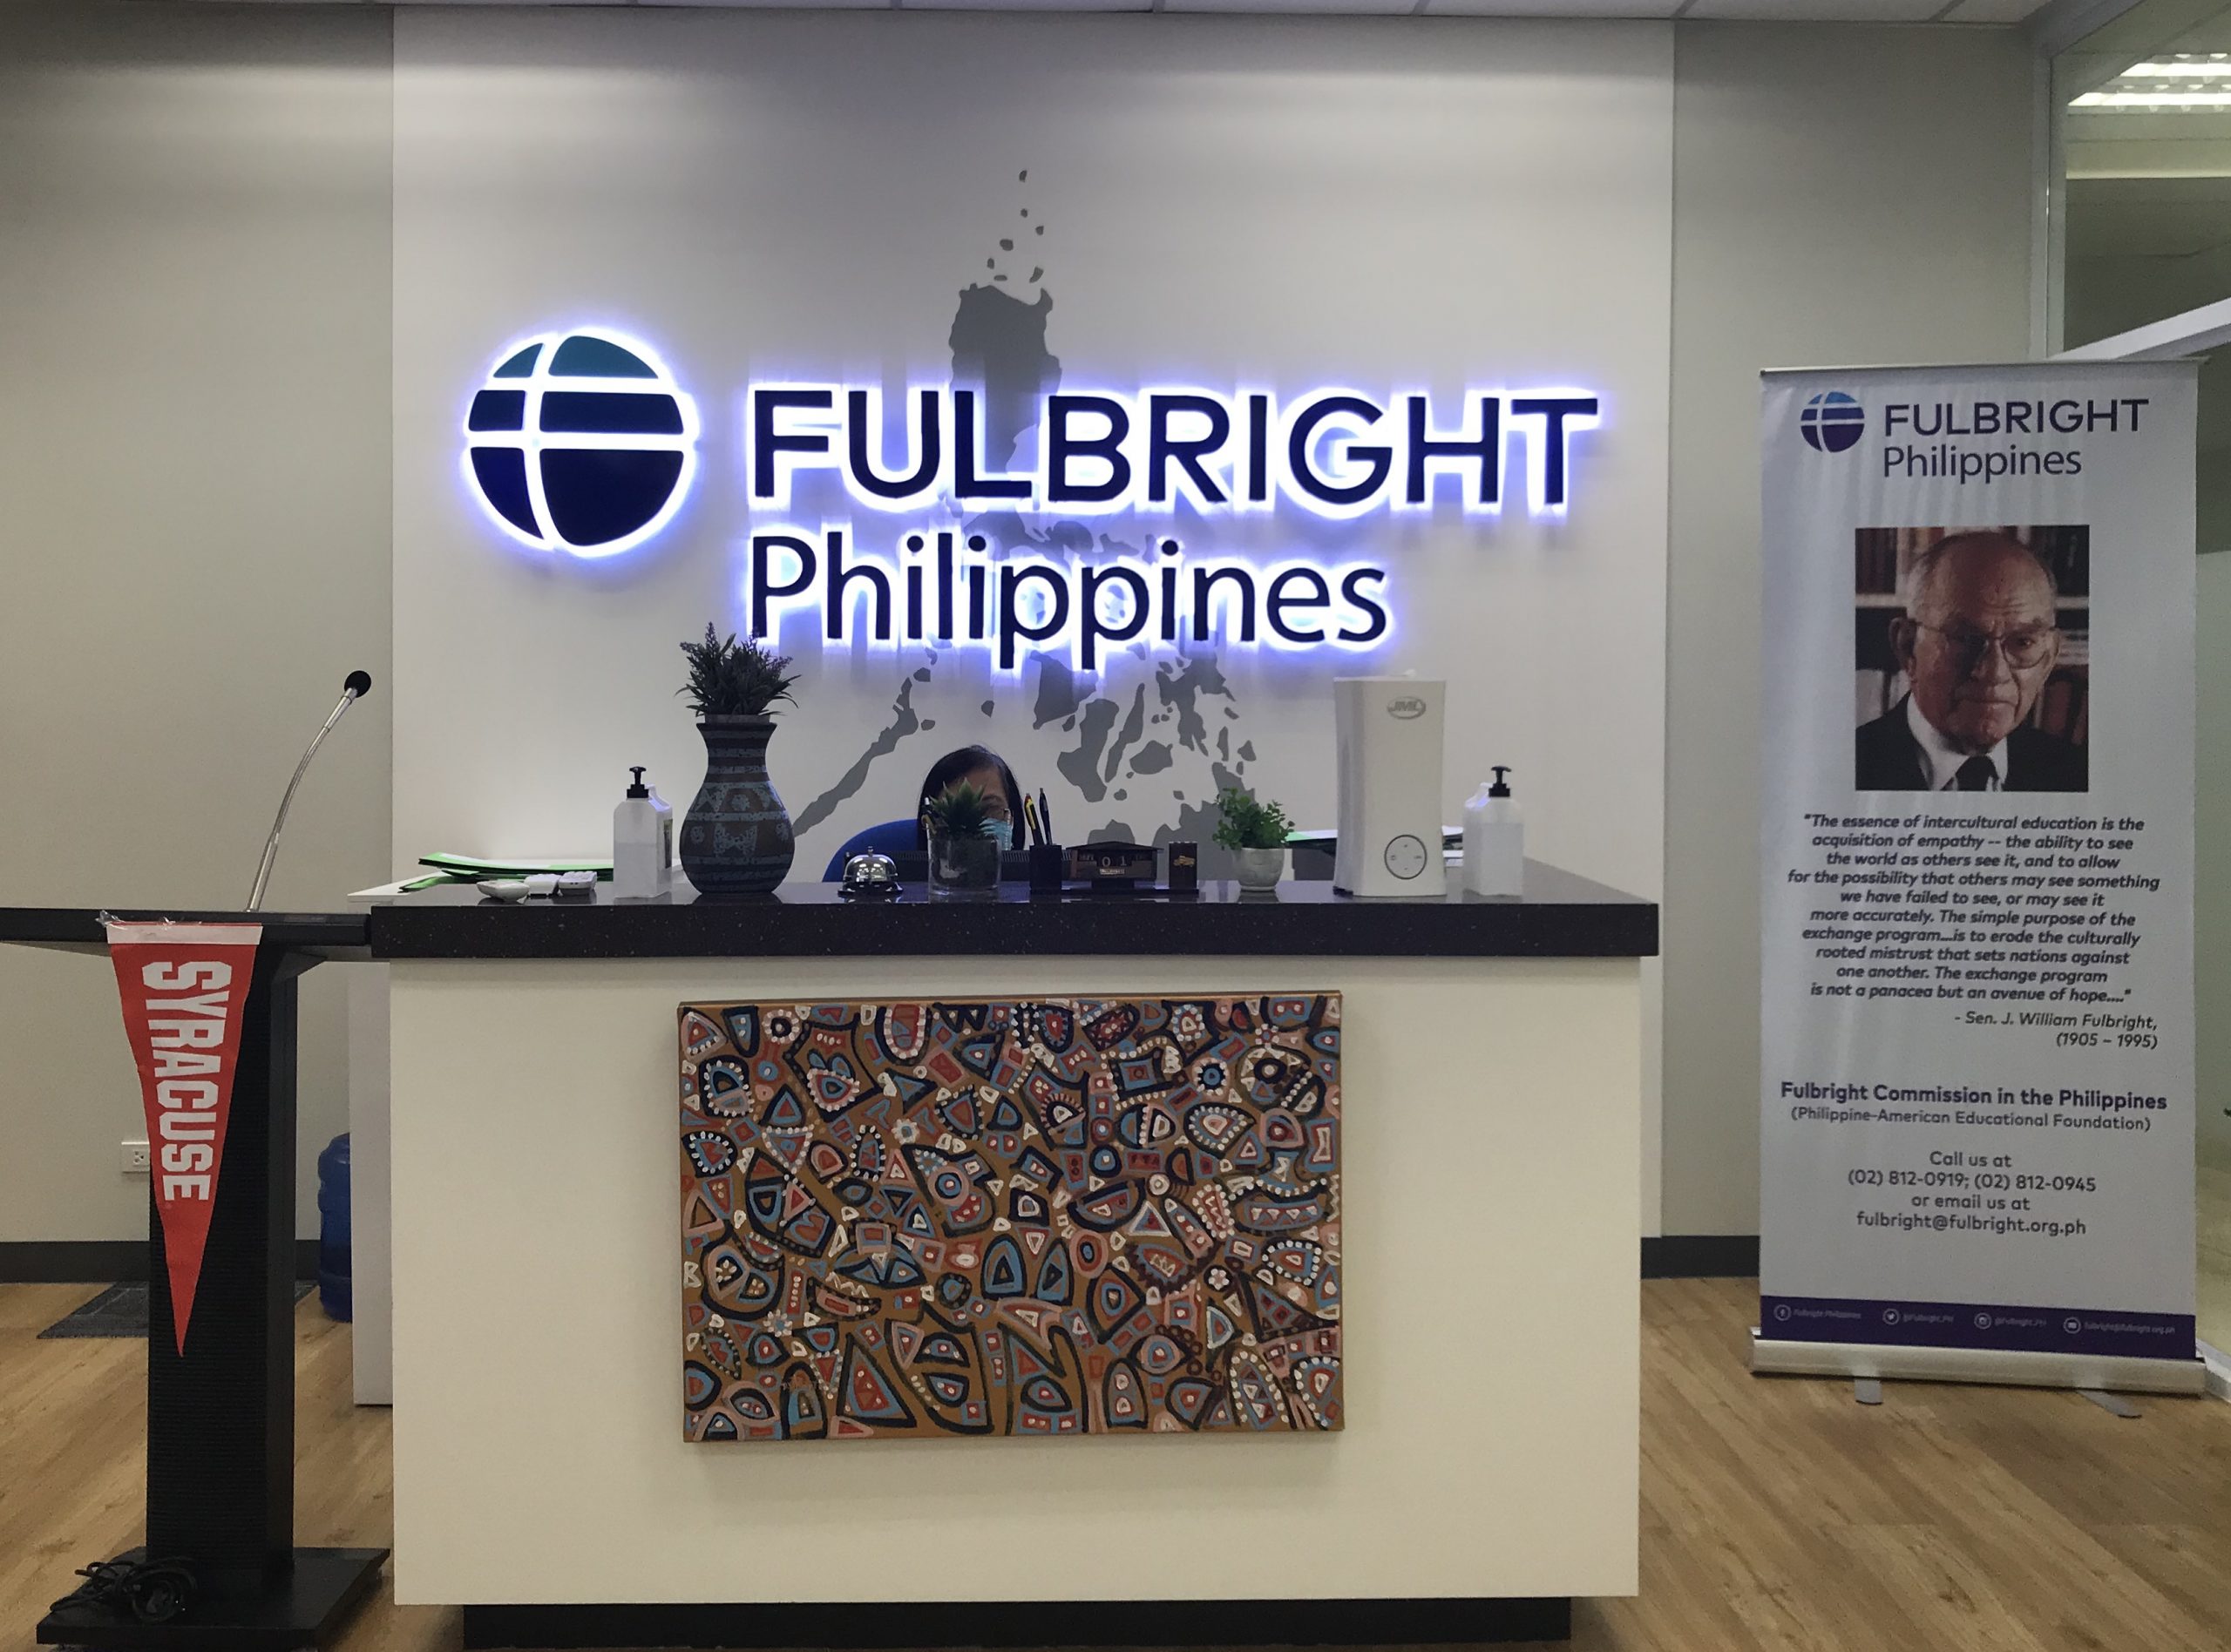 Fulbright Philippines office in Mandaluyong, Metro Manila, Philippines. 